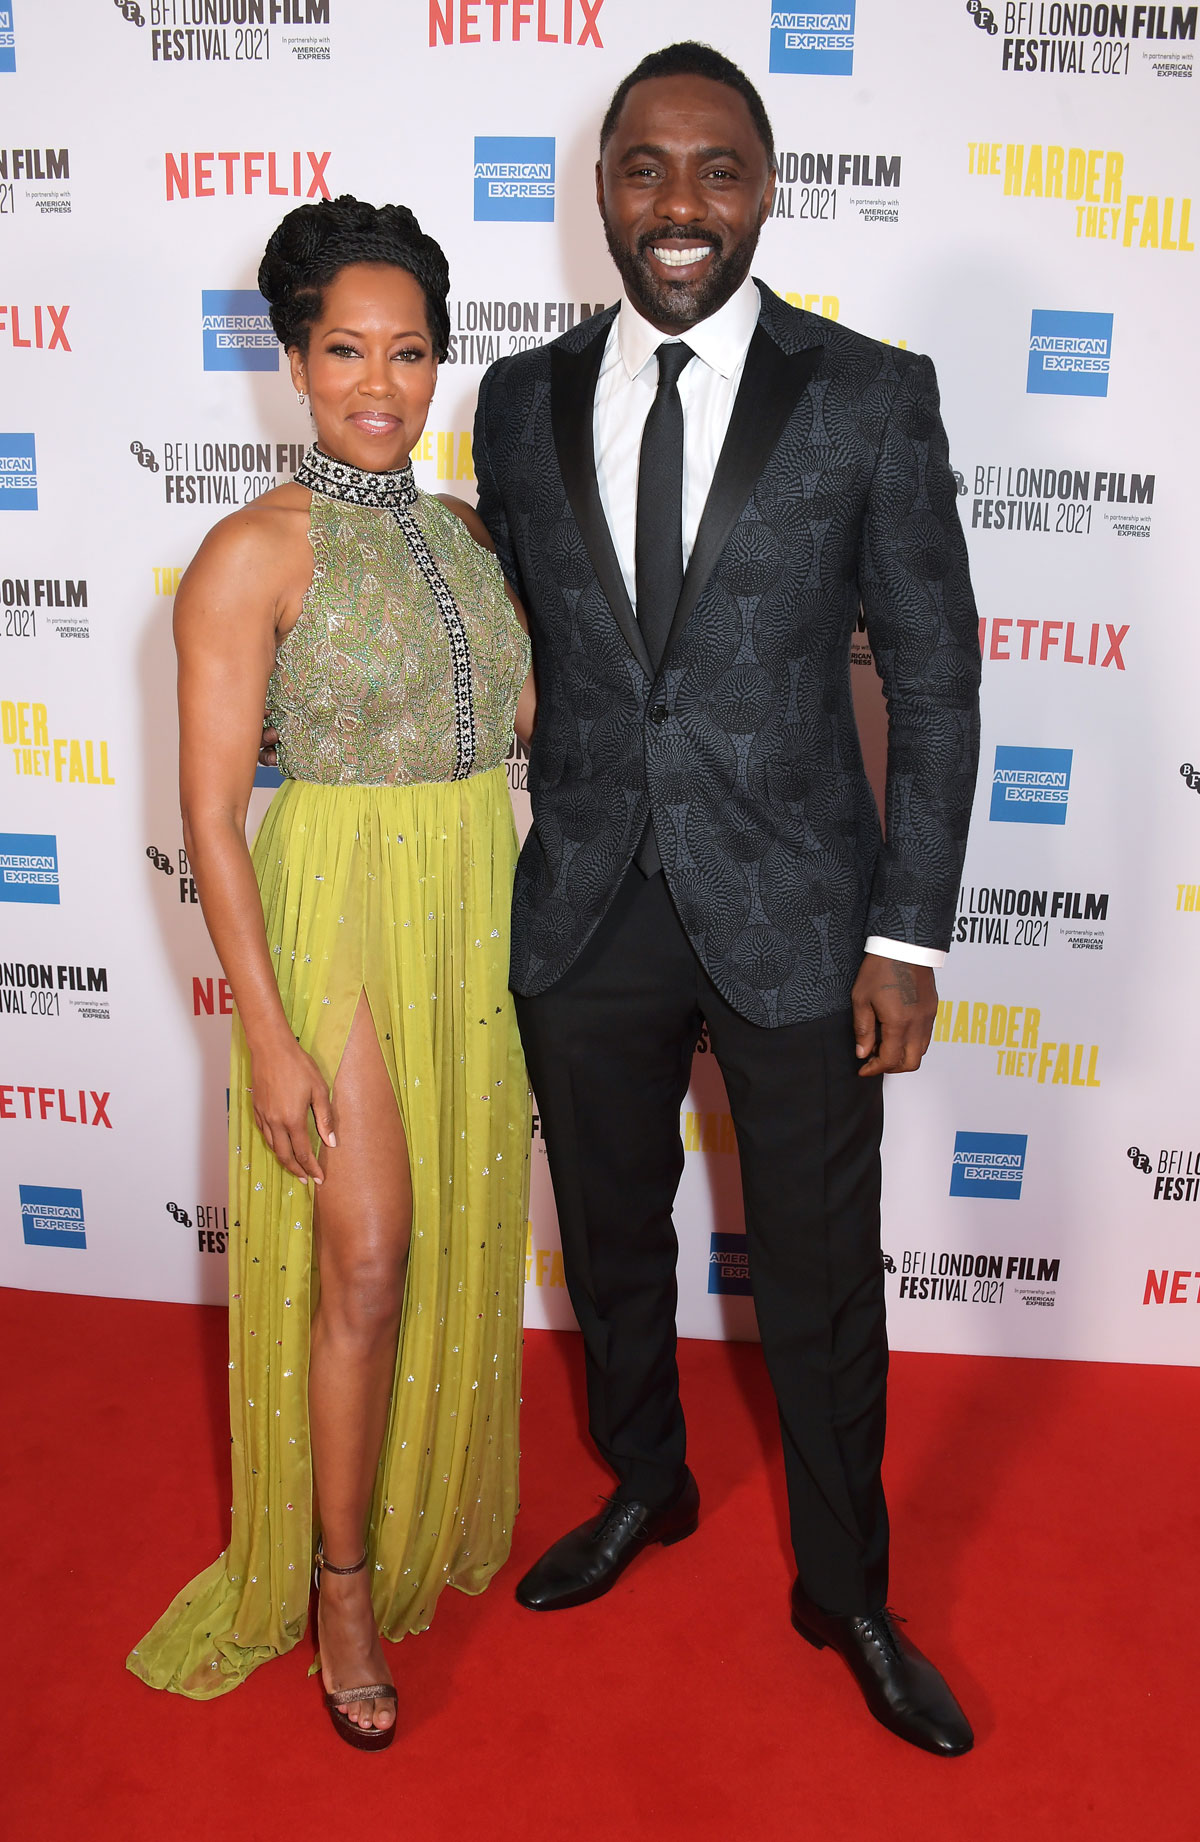 Regina King and Idris Elba attend the Opening Night Gala for The Harder They Fall